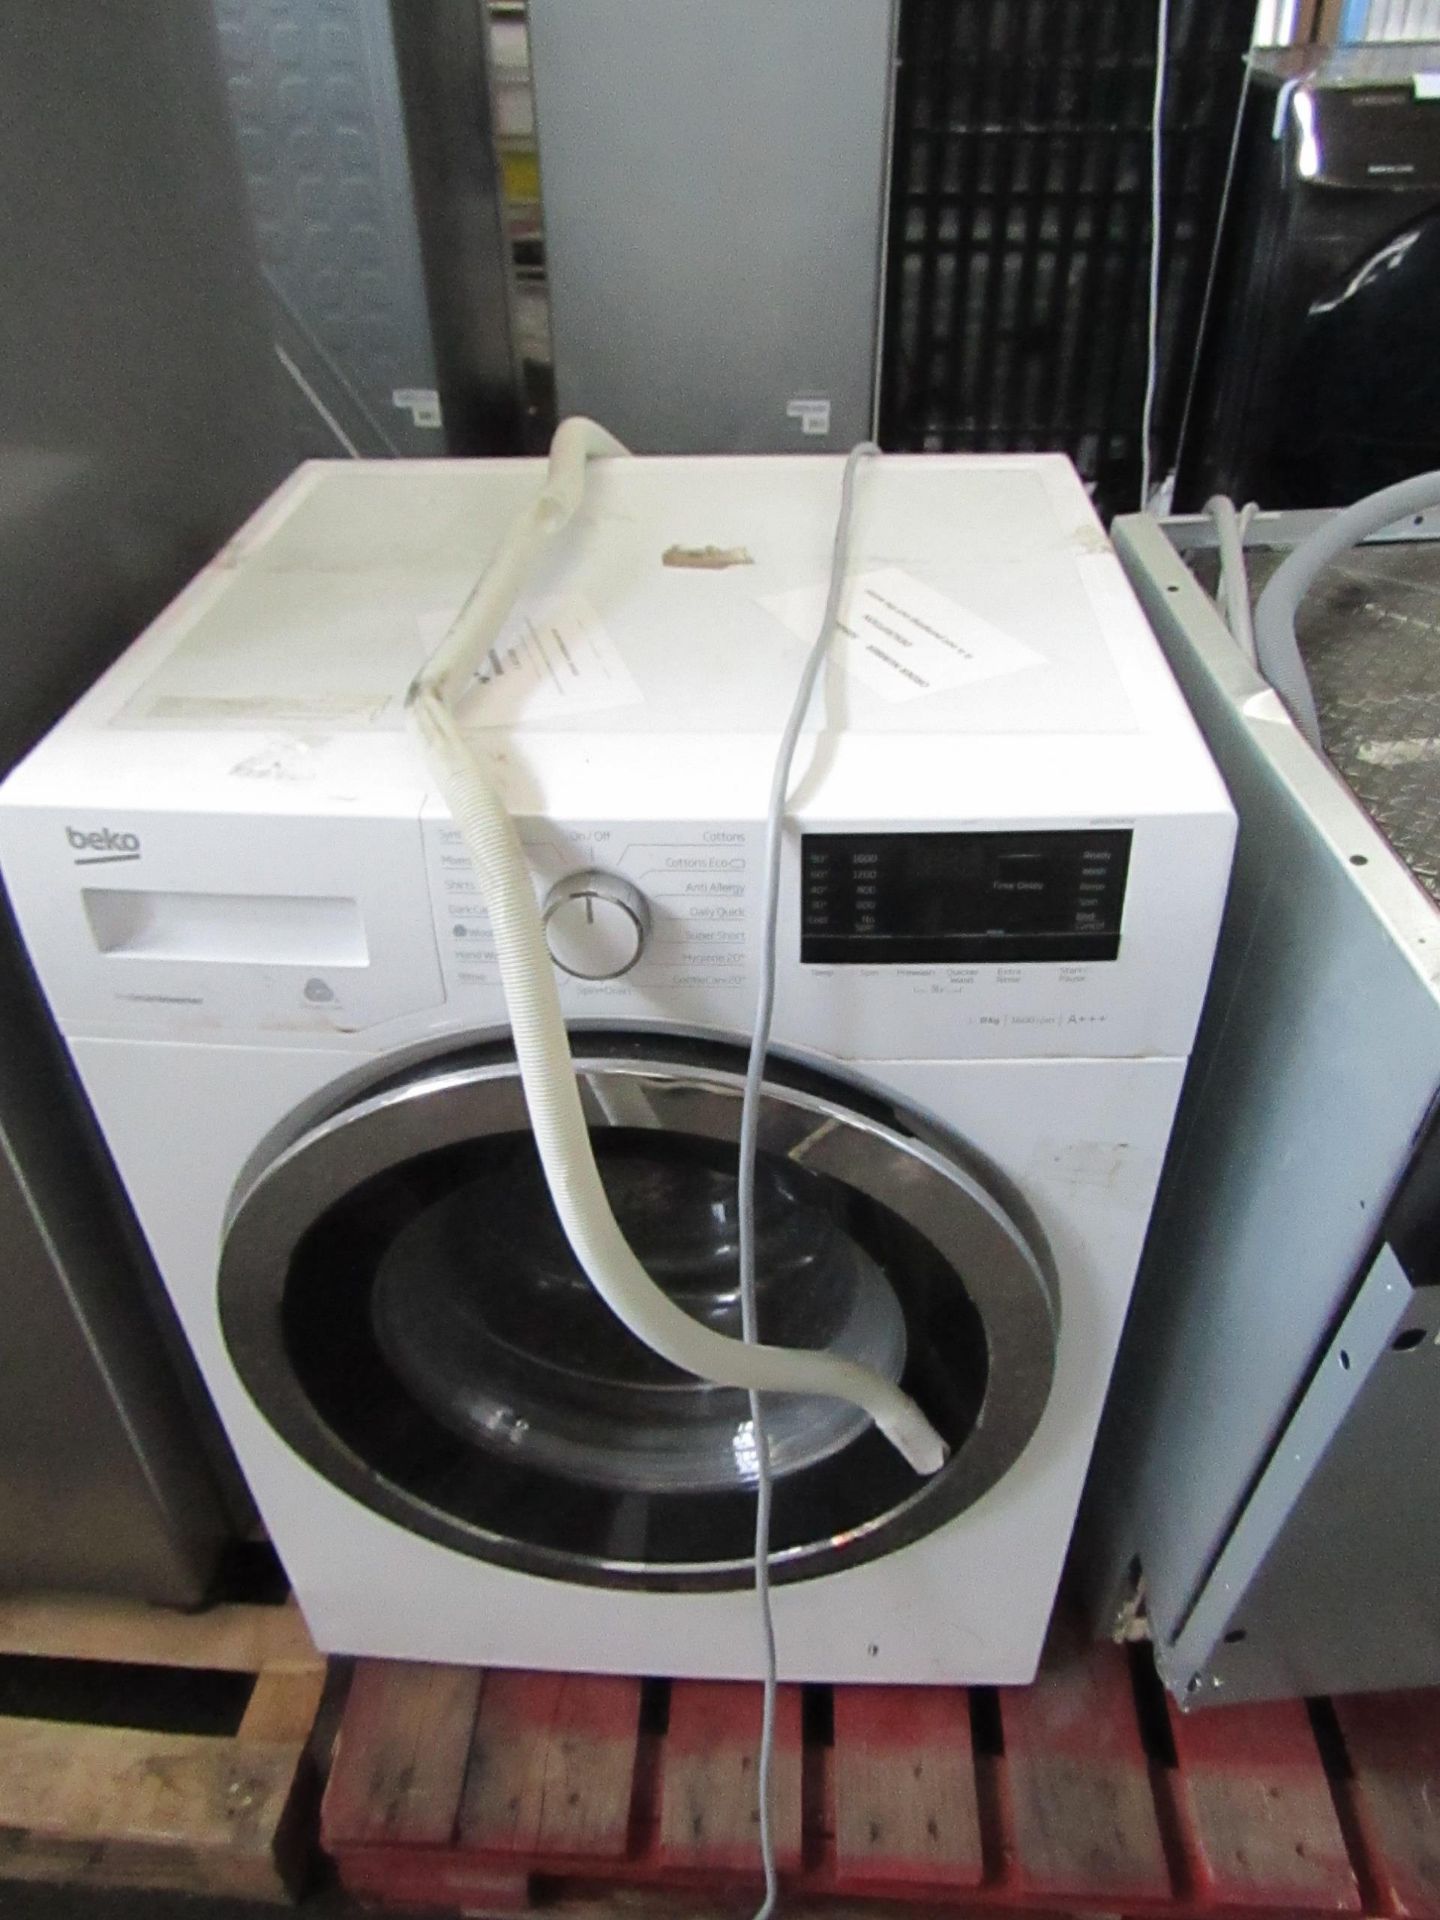 Beko Washing Machine Model No. WR862441W_WH in White RRP “?279.00, no power when plugged in